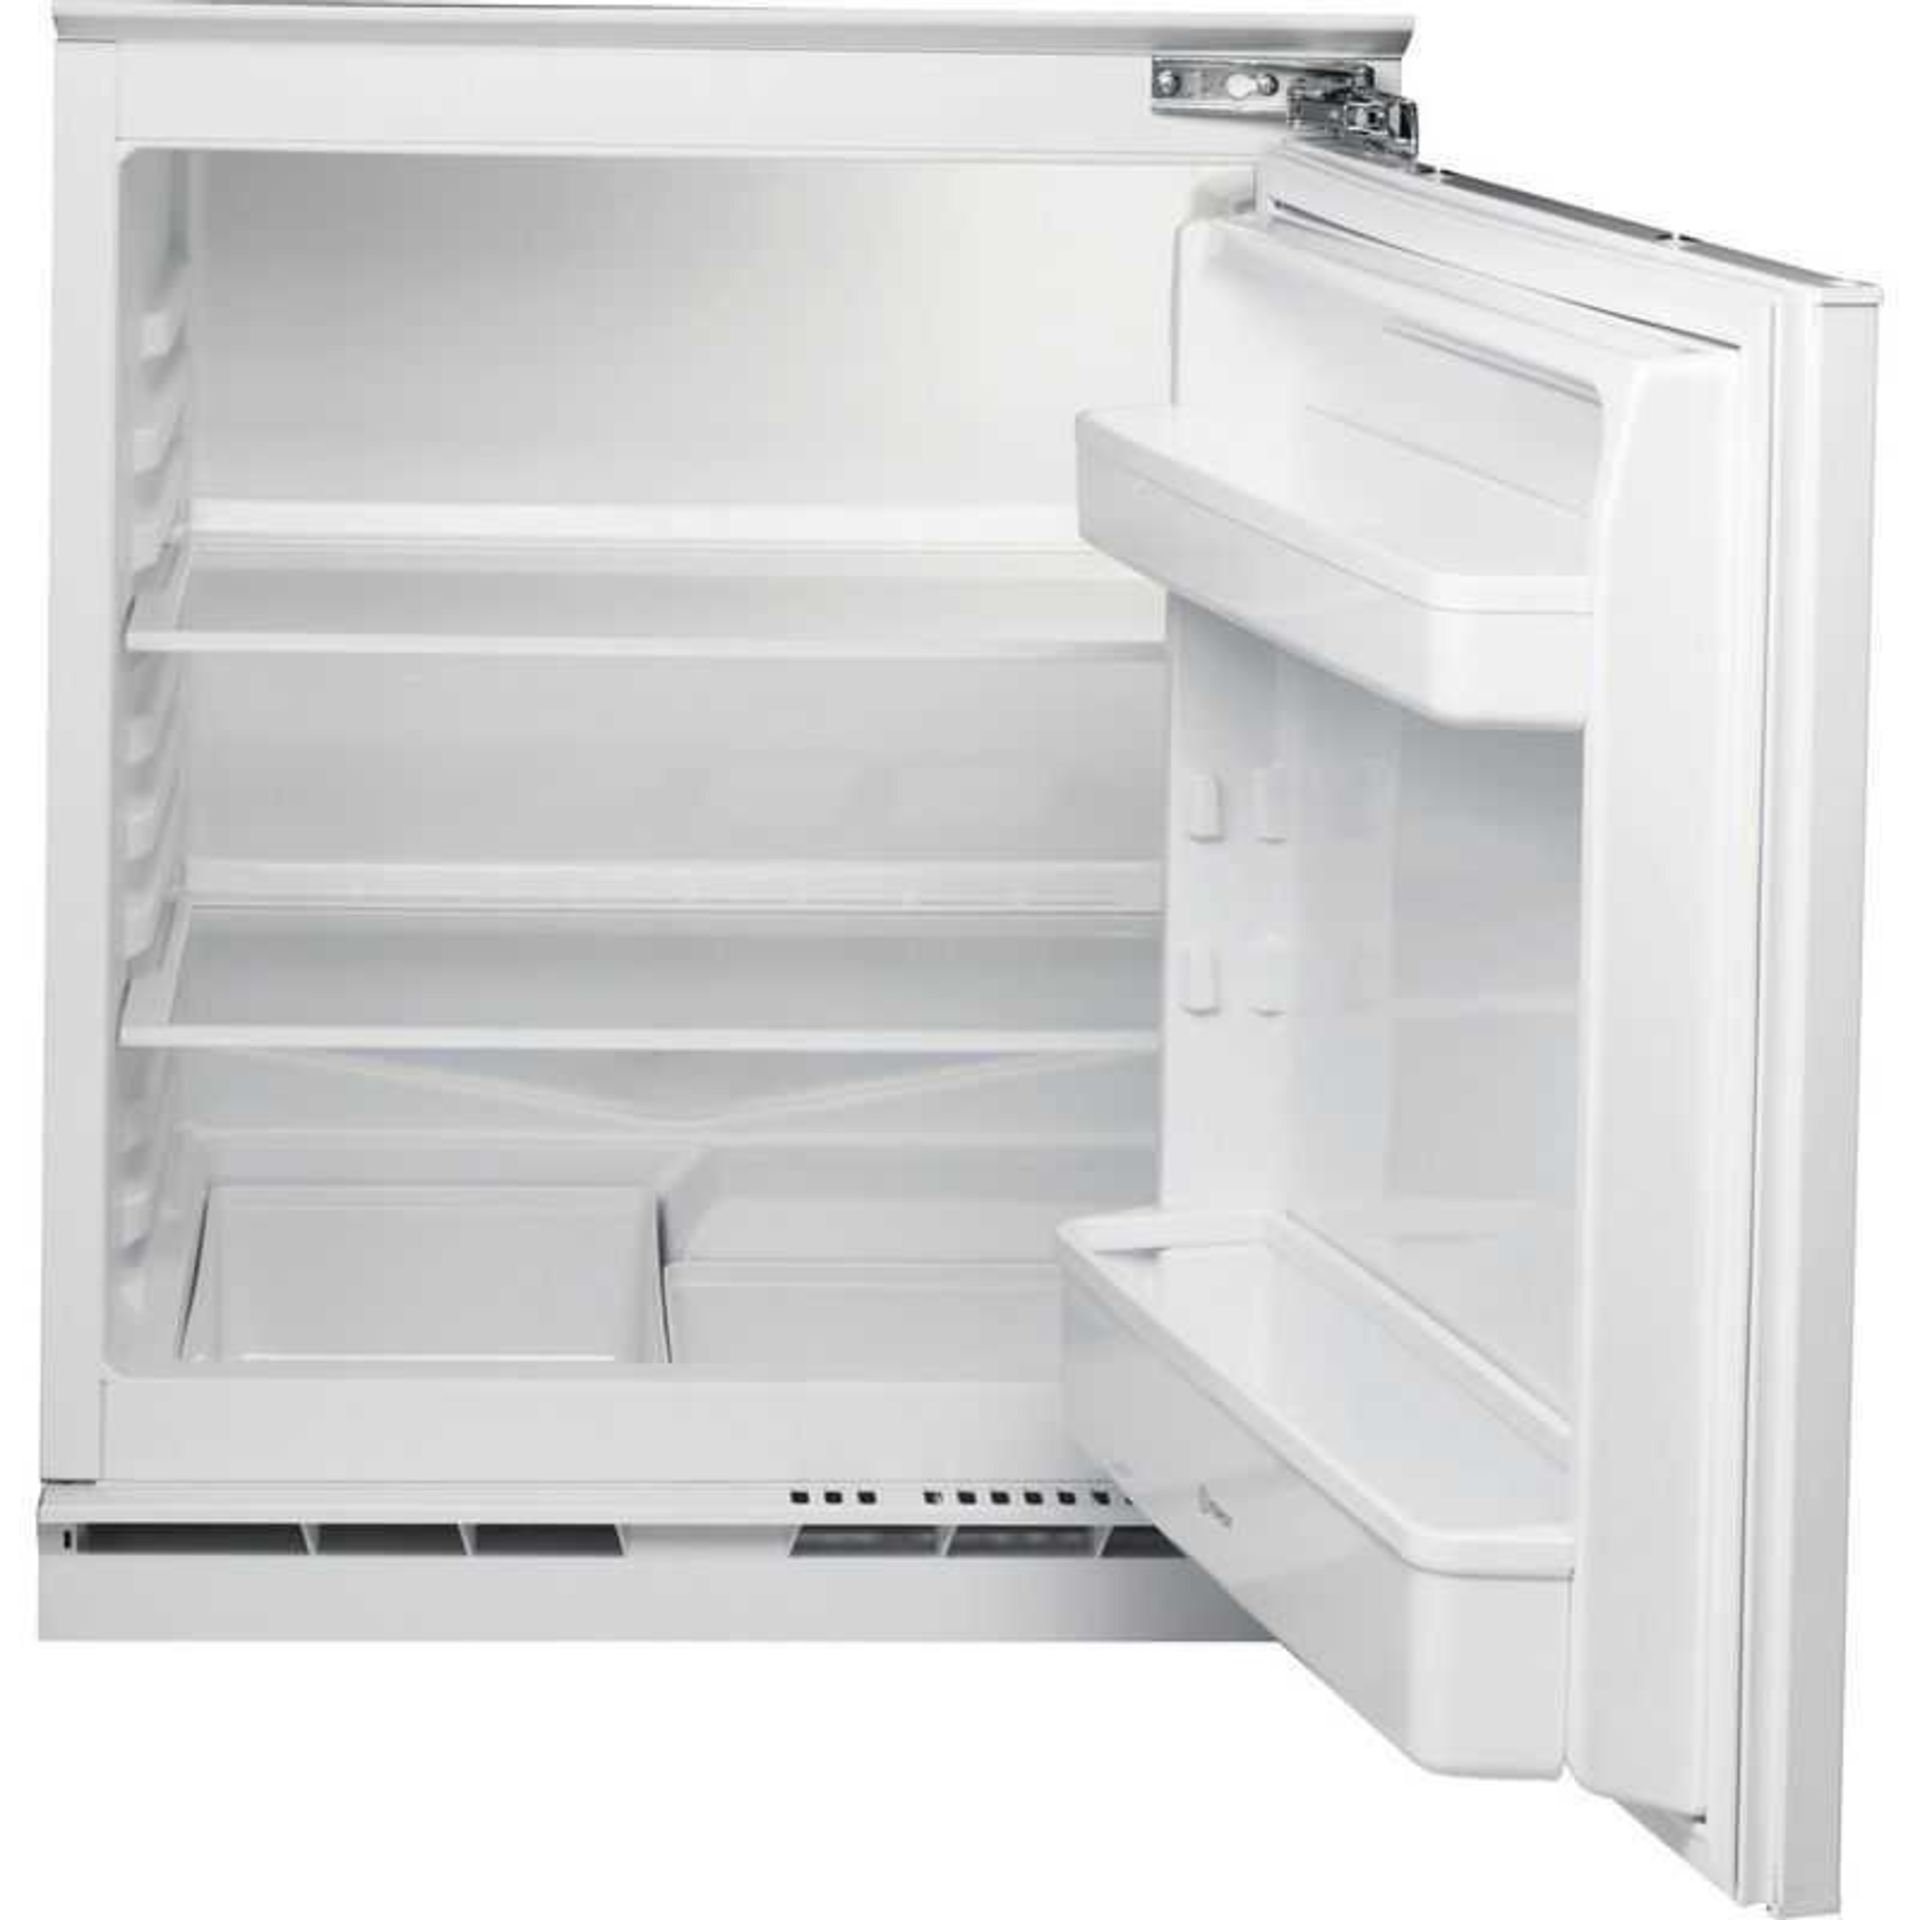 (Jb) RRP £280 Lot To Contain 1 Unboxed Indesit Ila1Uk1 Built In Under Integrated Fridge In White (28